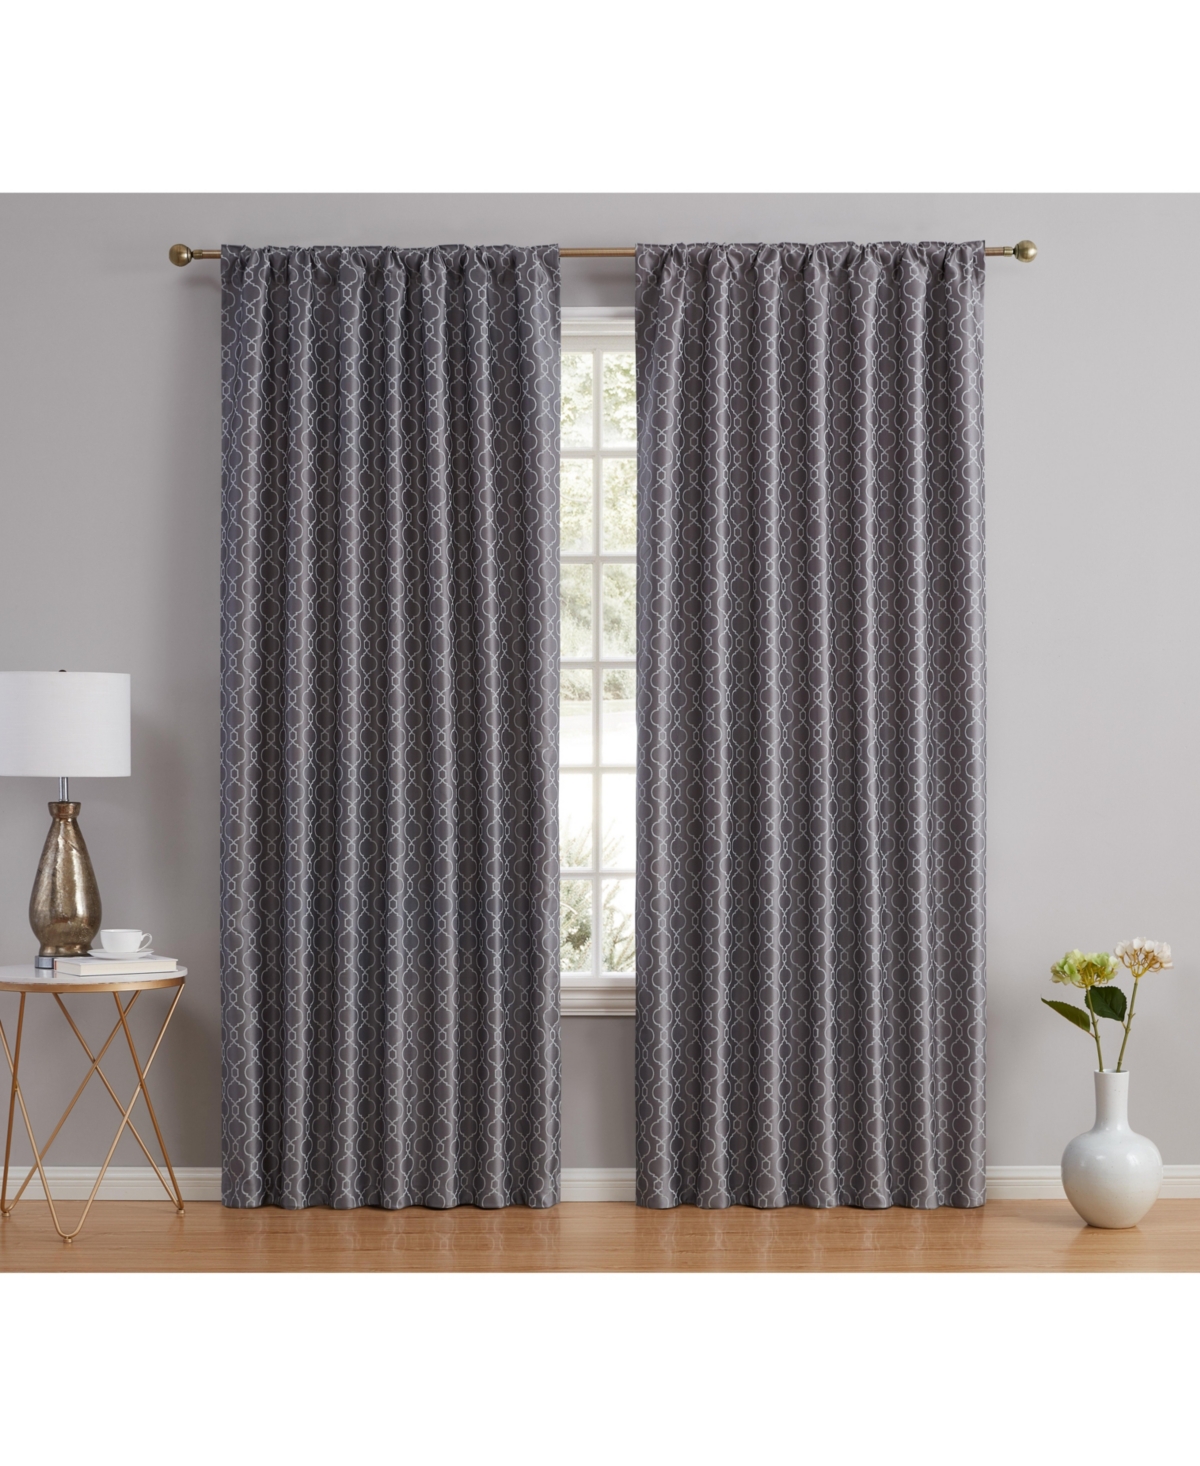 Hlc.me Franklin Moroccan 100% Complete Blackout Thermal Insulated Energy  Savings Heat/Cold Blocking Back Tab Rod Pocket Curtain Drapery for Bedroom  